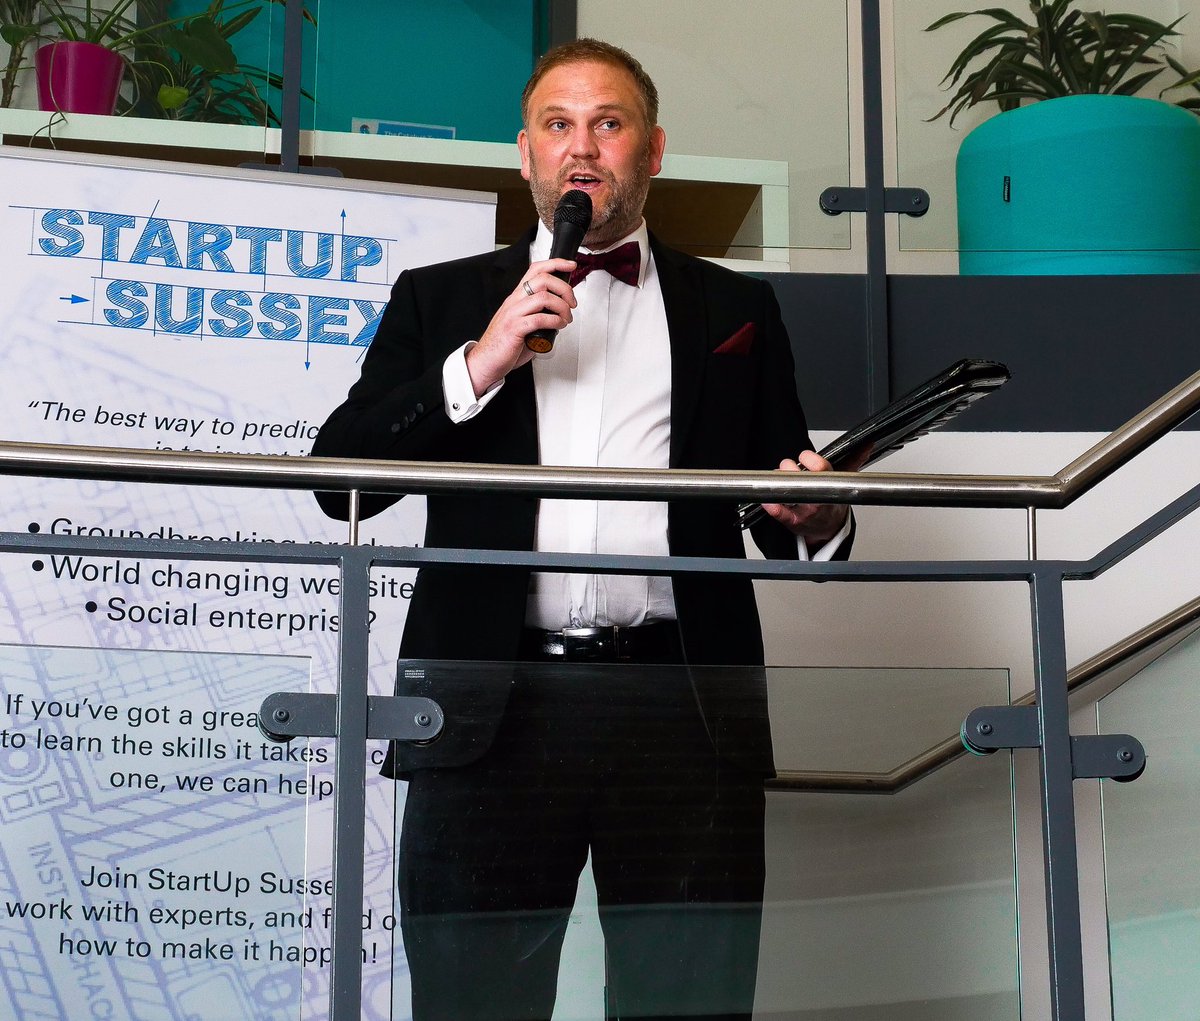 The winners of this years @StartUp_Sussex prizes have been announced. Read all about it here: sinc.co.uk/news-article/g… #Entrepreneurship #Innovation #startups